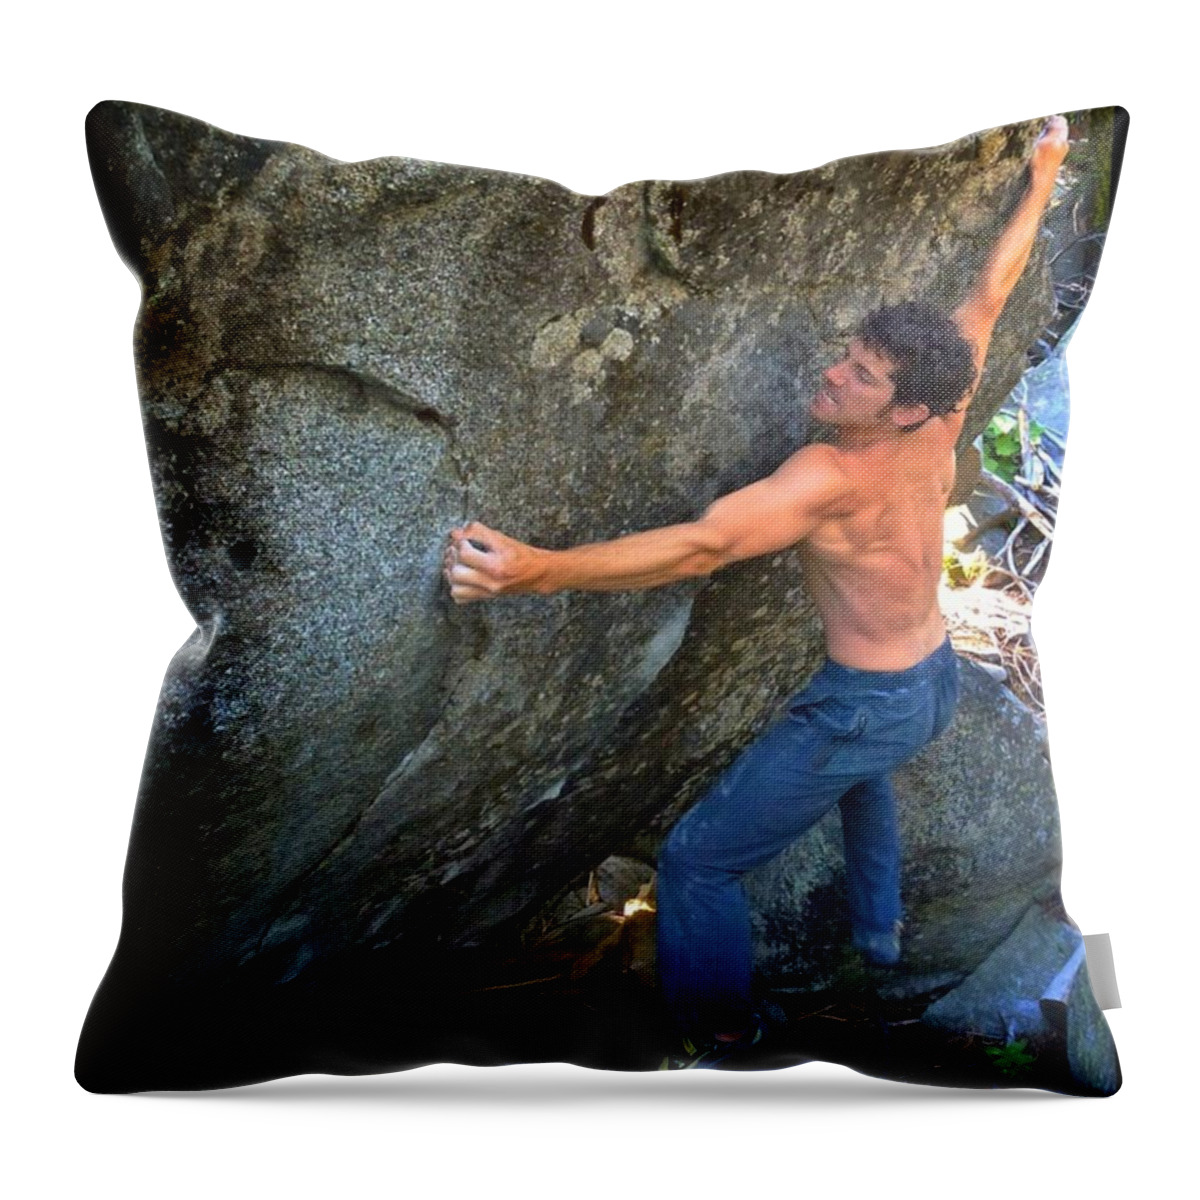 Cute Throw Pillow featuring the photograph Crossfire by Noah Kaufman